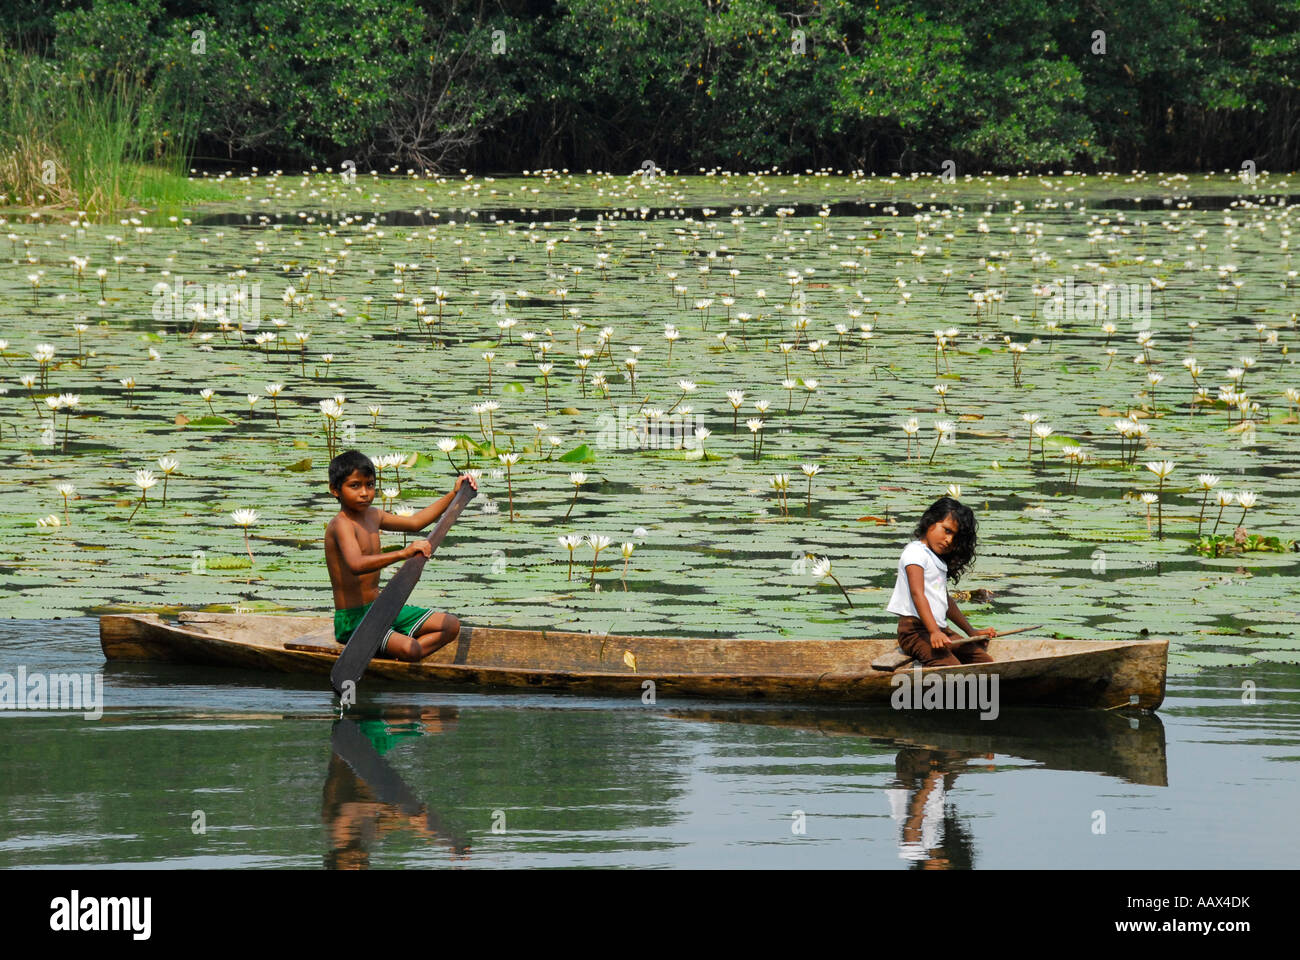 Indigenous sibling paddling in traditional boat on Rio Dulce in front of water lilies, Guatemala, Central America Stock Photo